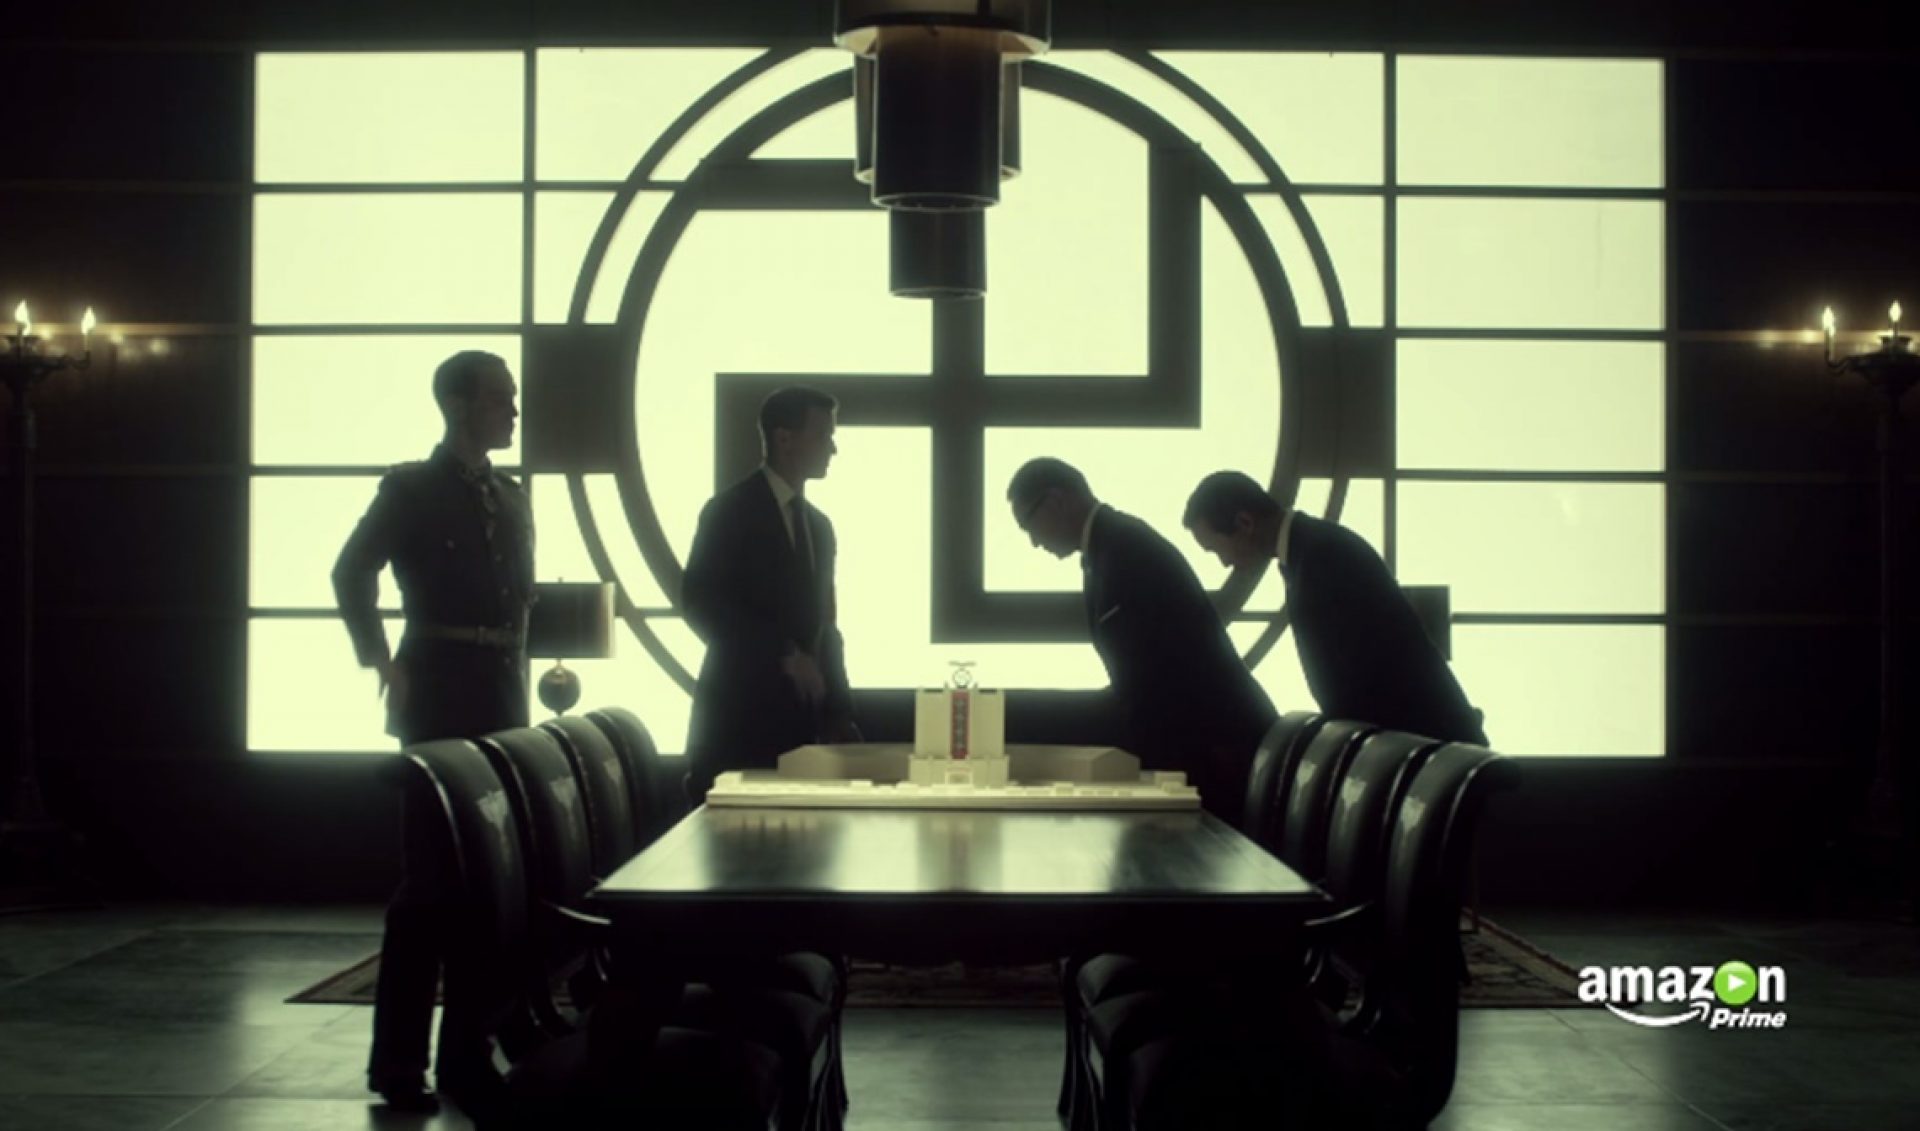 Amazon Drops Trailer For Alternate History Series ‘The Man In The High Castle’